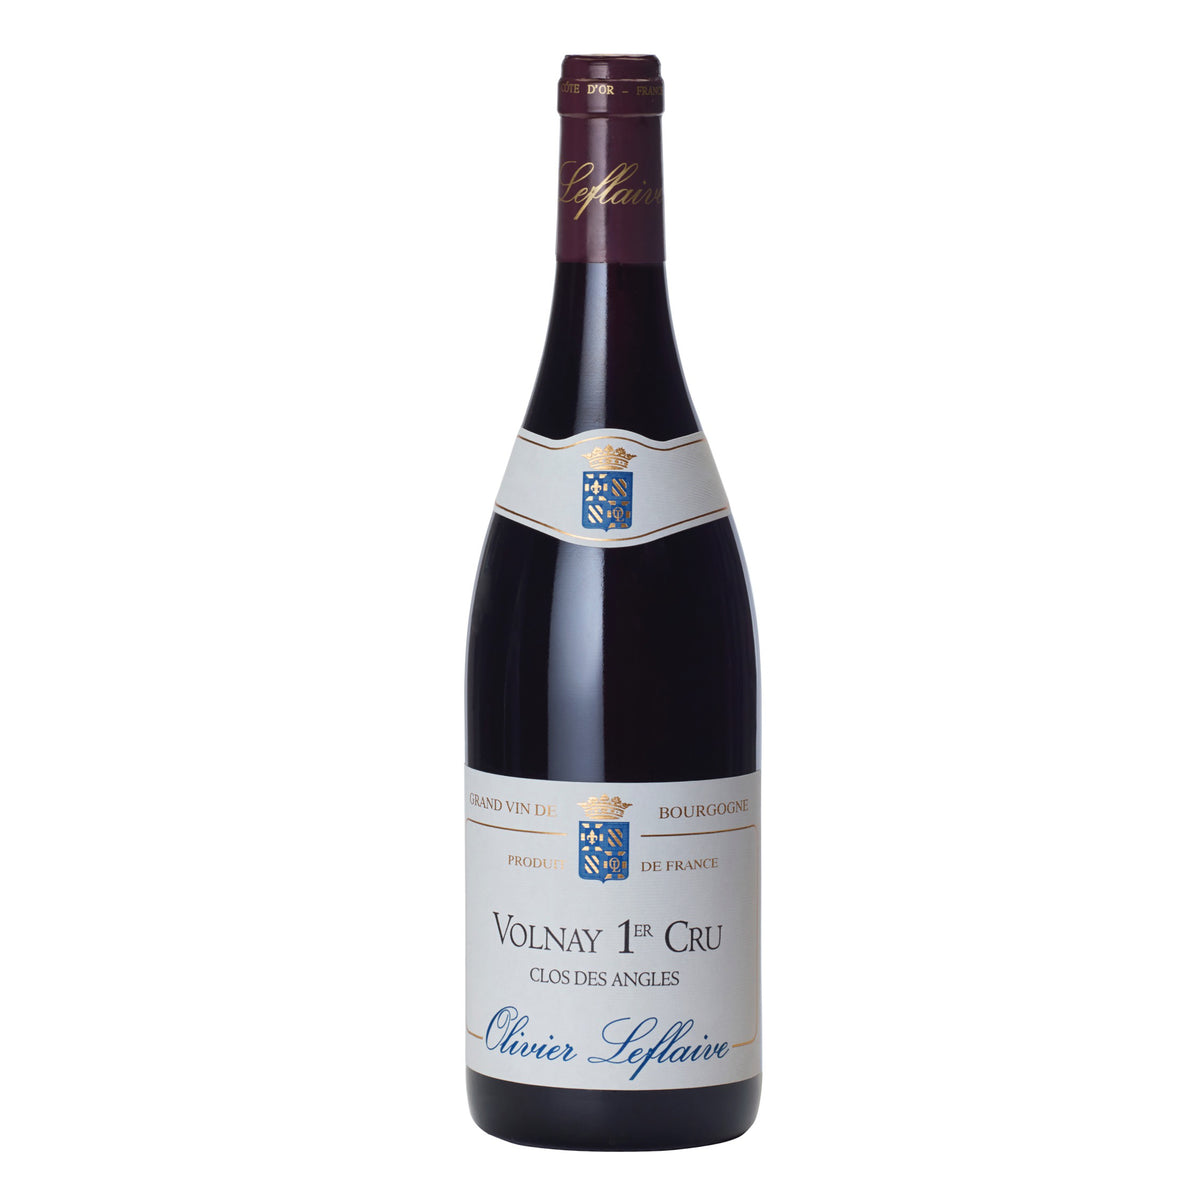 OLIVIER LEFLAIVE Volnay 1er Cru &quot;Clos des Angles&quot; 2016